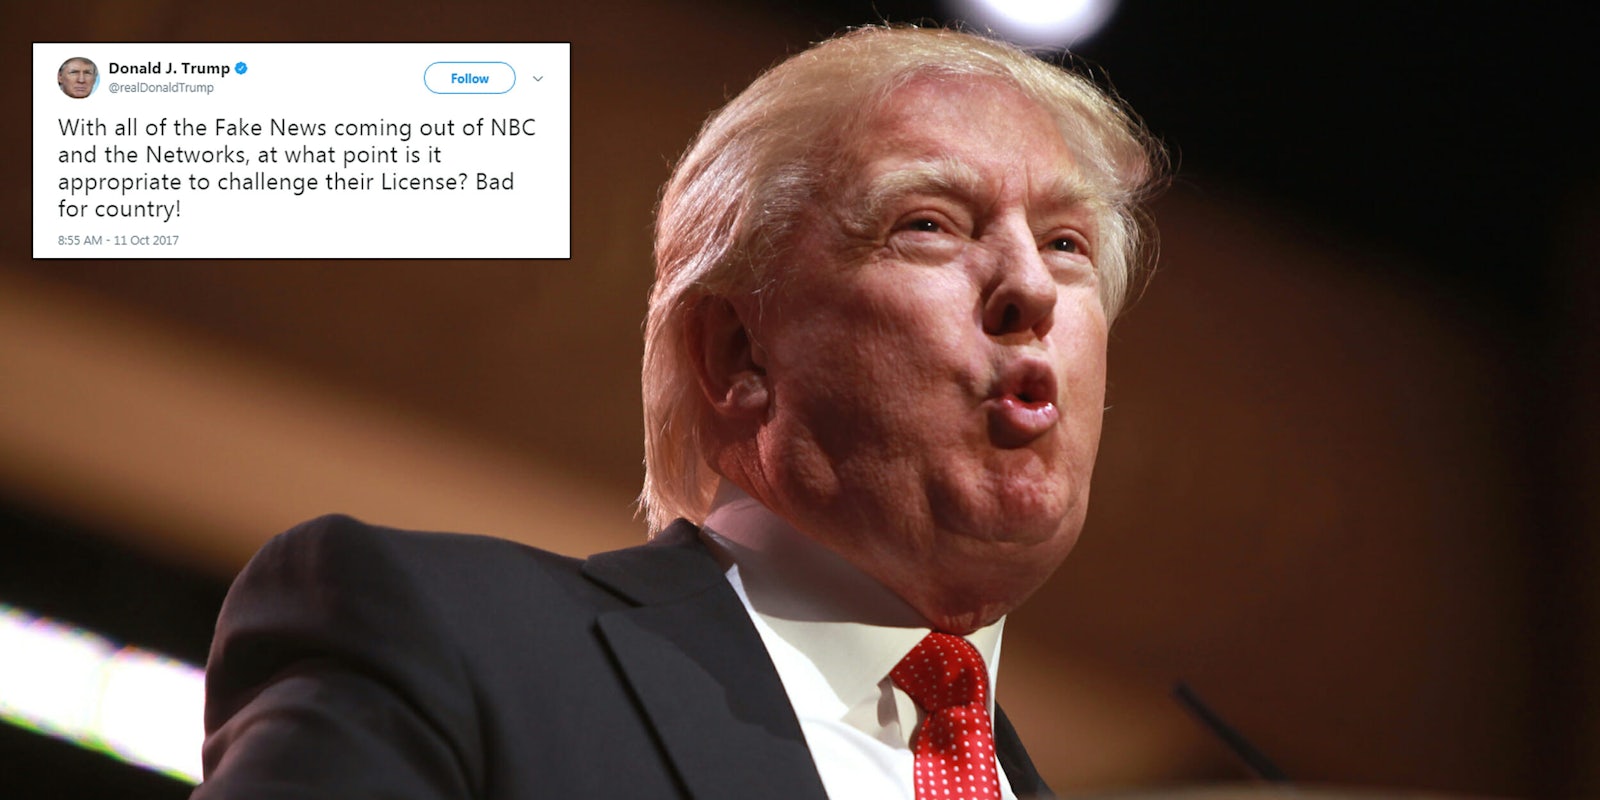 Donald Trump suggested that NBC News' license be challenged for a recent report.